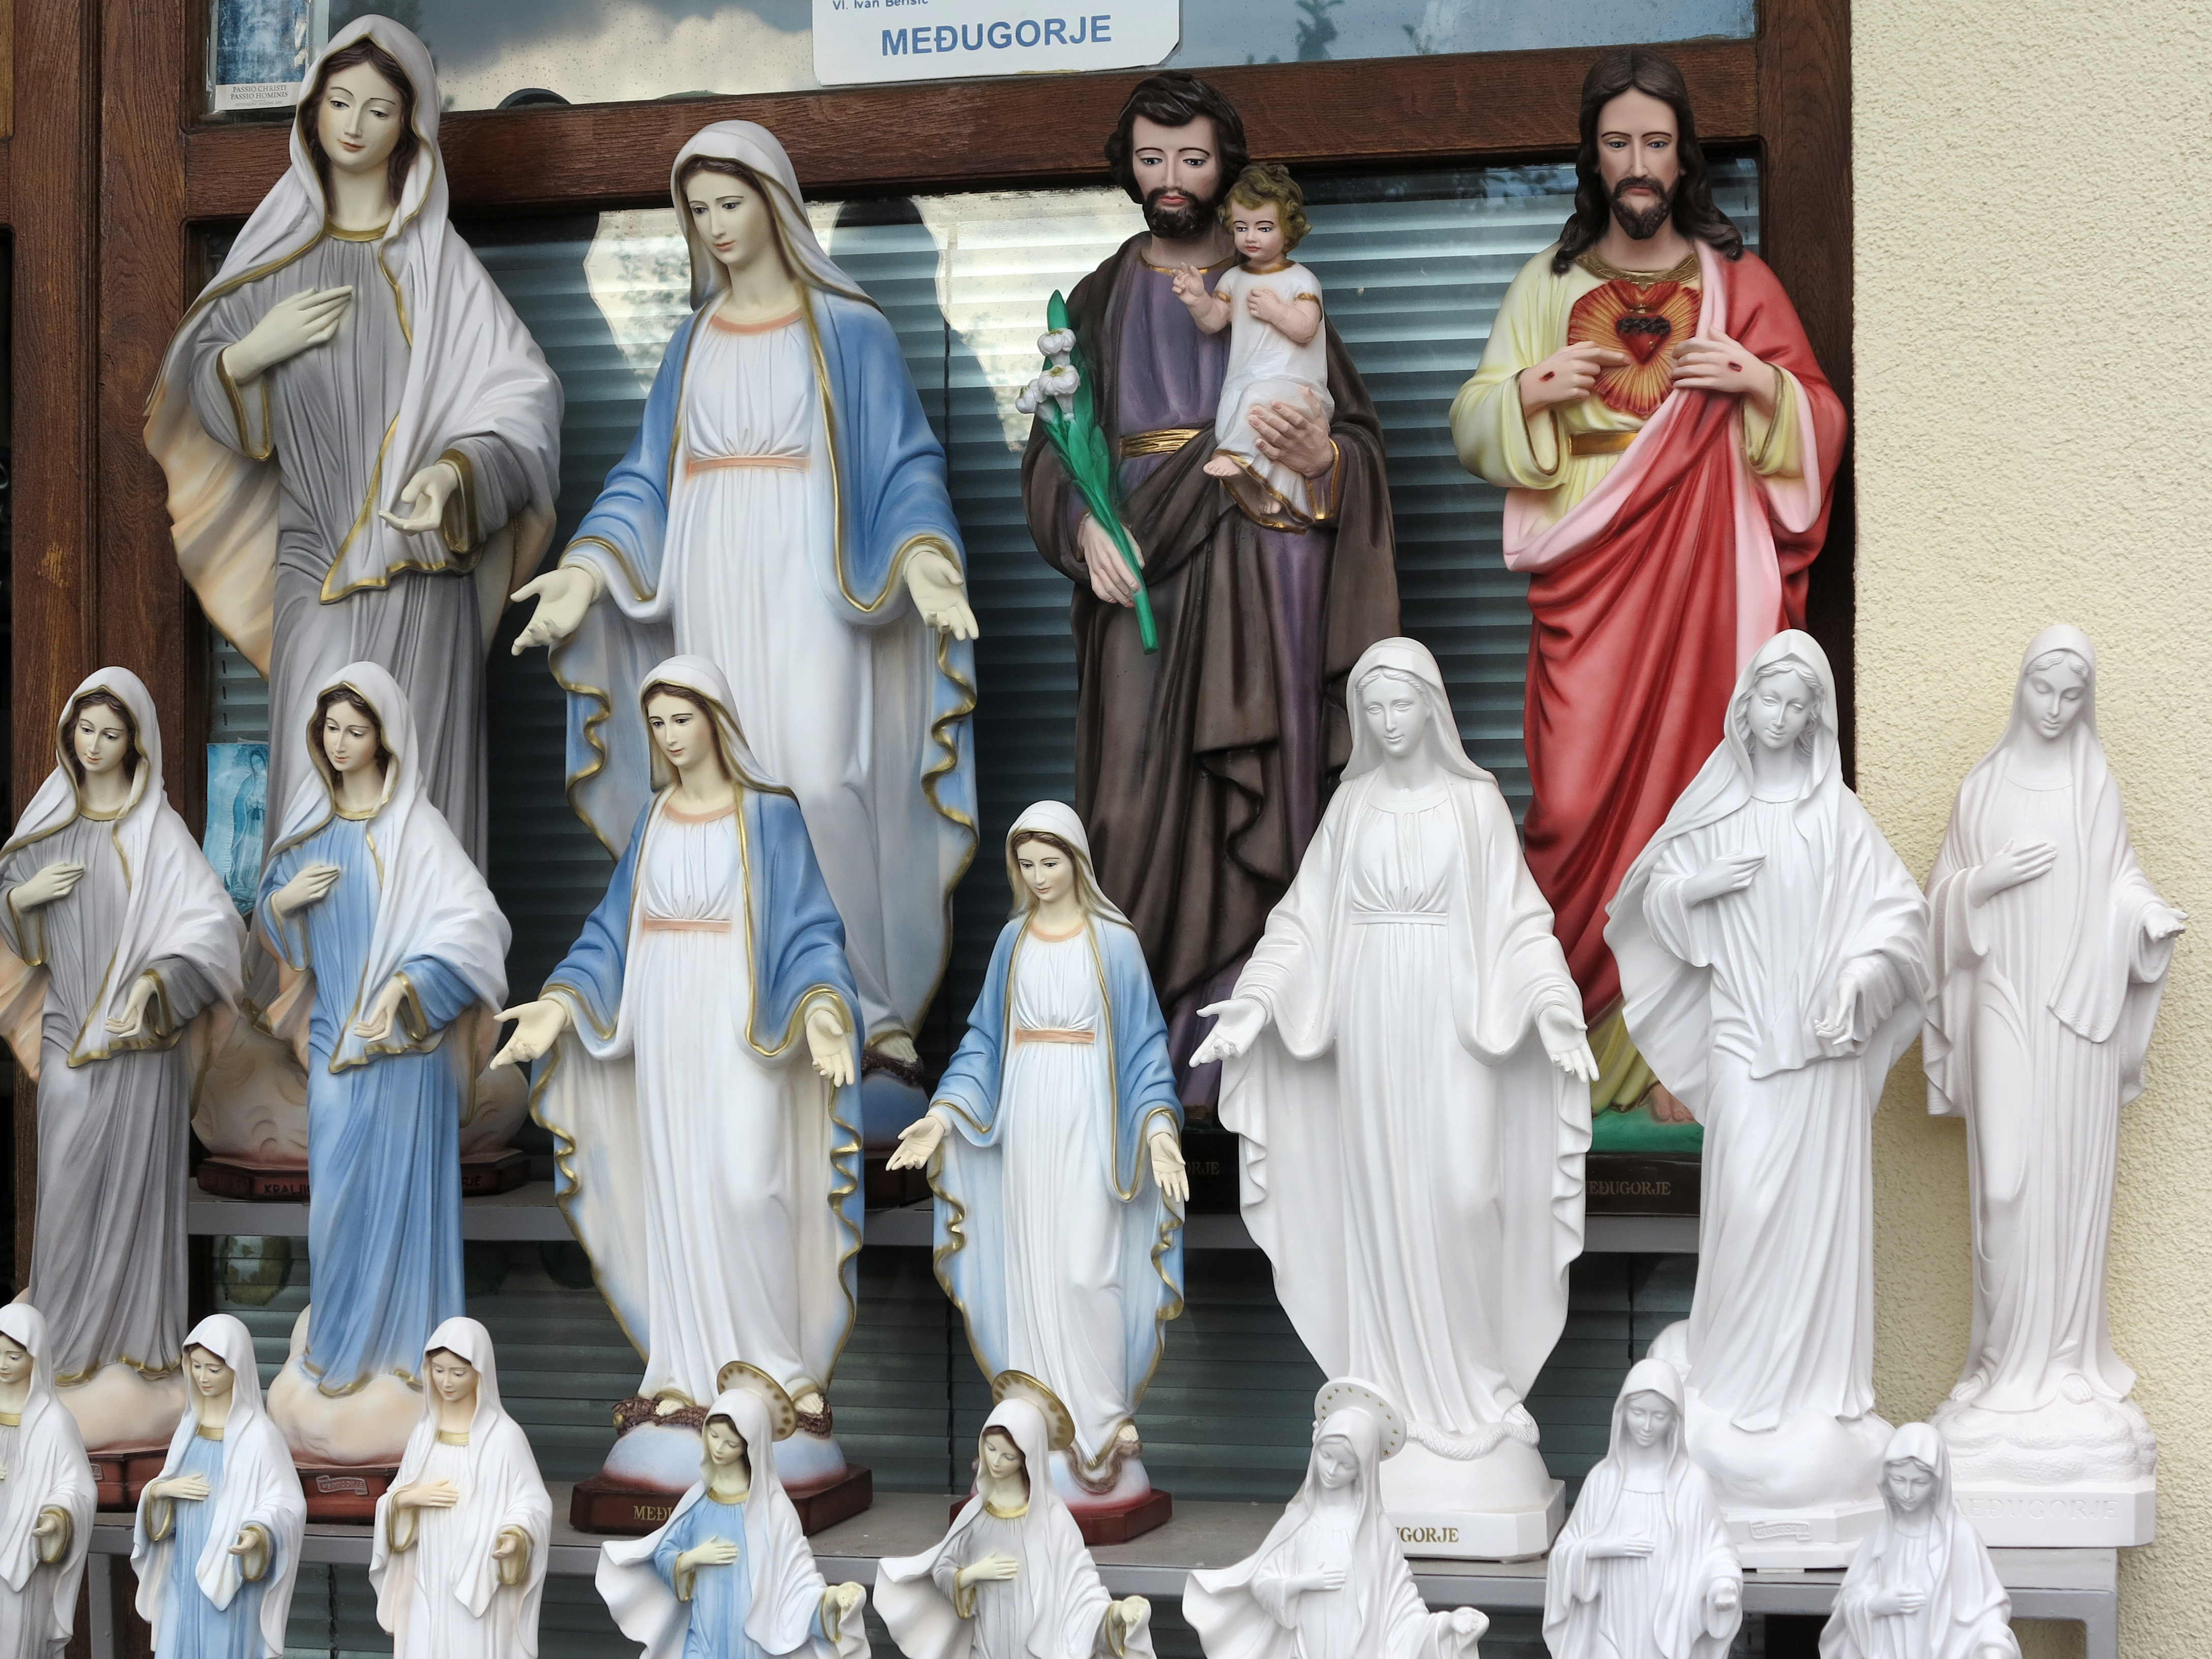 Vatican dignitaries head to Medjugorje amid reports of imminent recognition